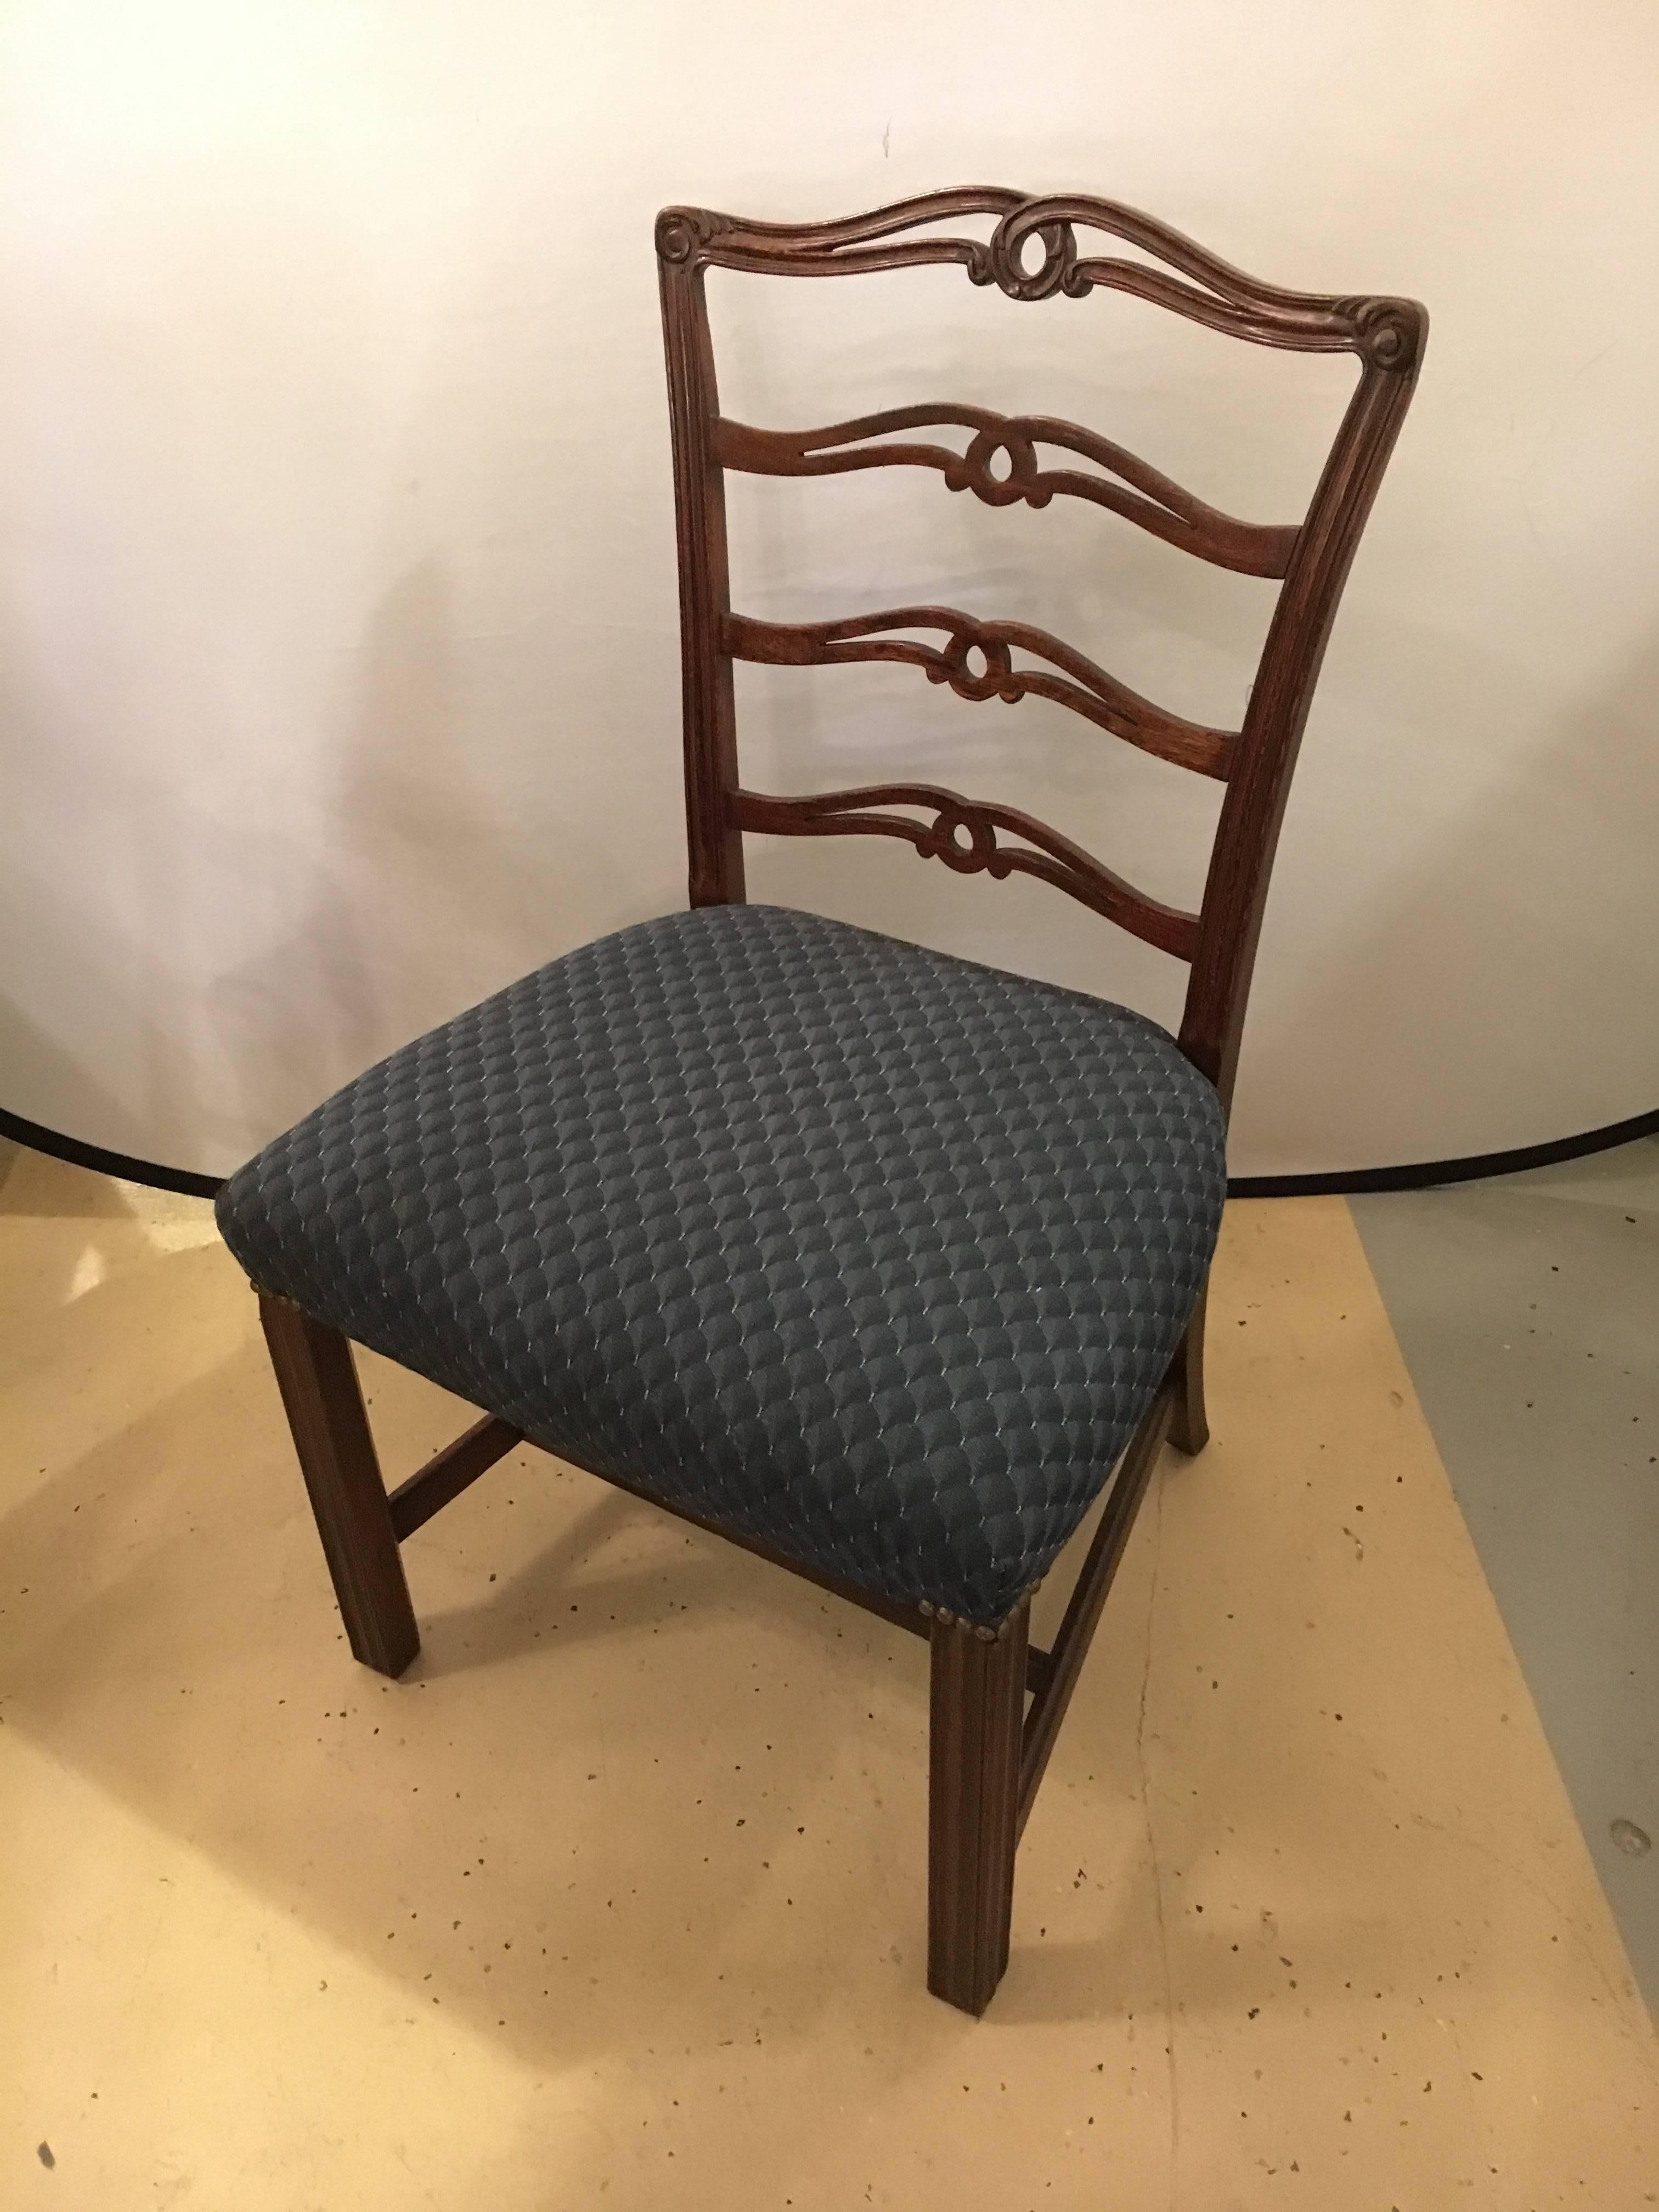 Pair 1930s mahogany ladder back dining side chairs.  Each with square legs and crossbar bottoms in the Georgian style. All having pretzel ladder backs. A fine pair of dining chairs.


Measurements for side chairs: 36 H x 22 W x 19 D
